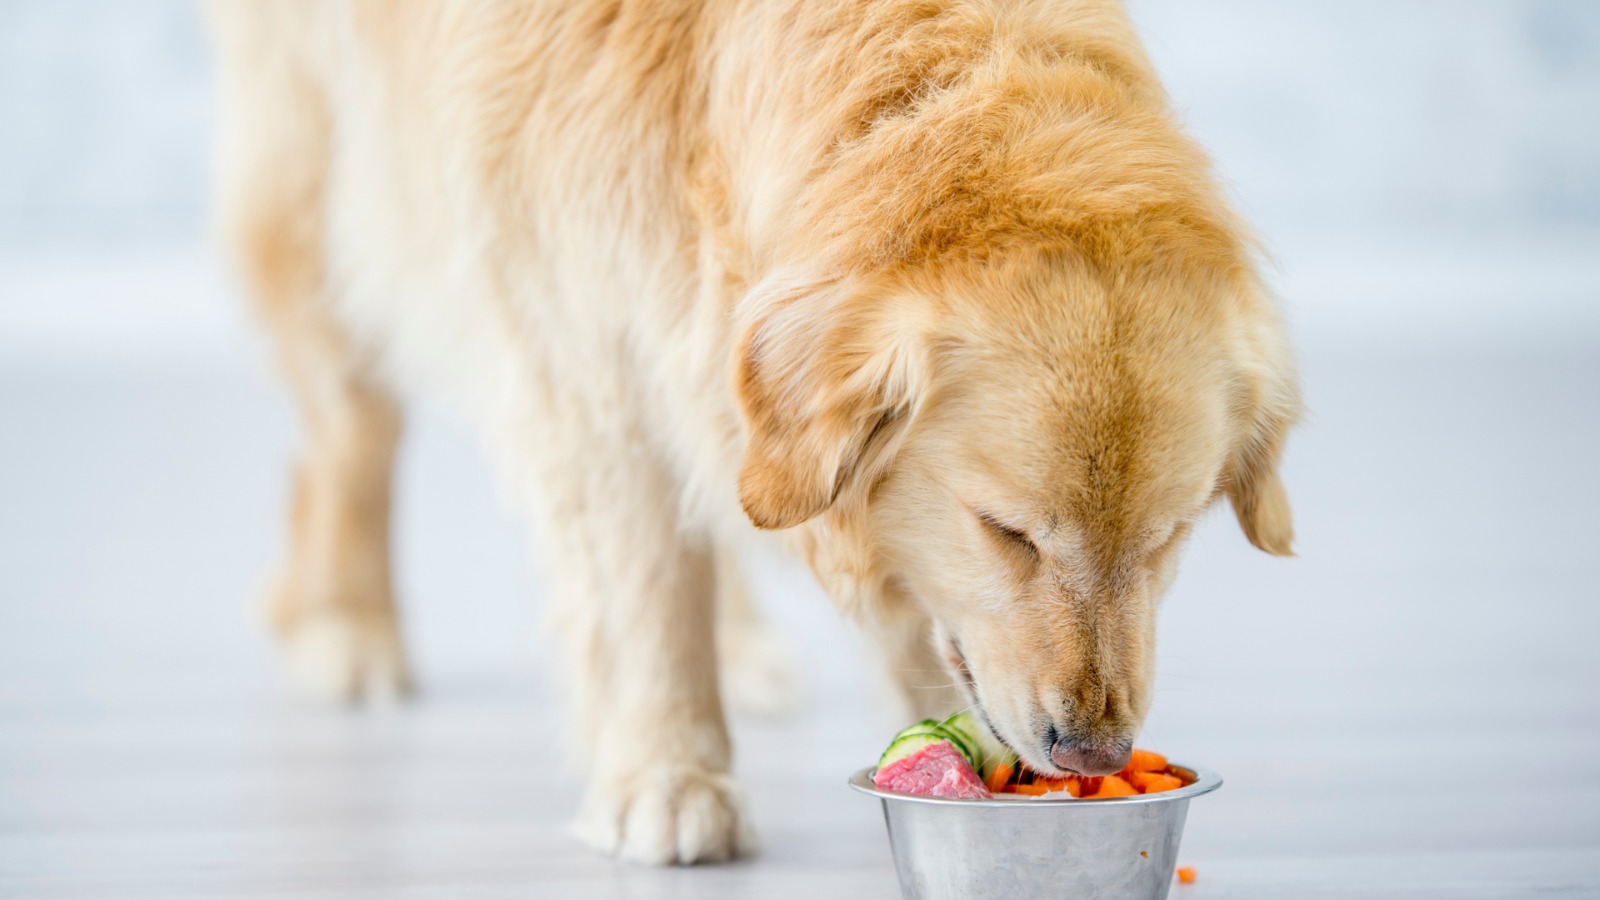 How To Increase The Iron In My Dog's Diet